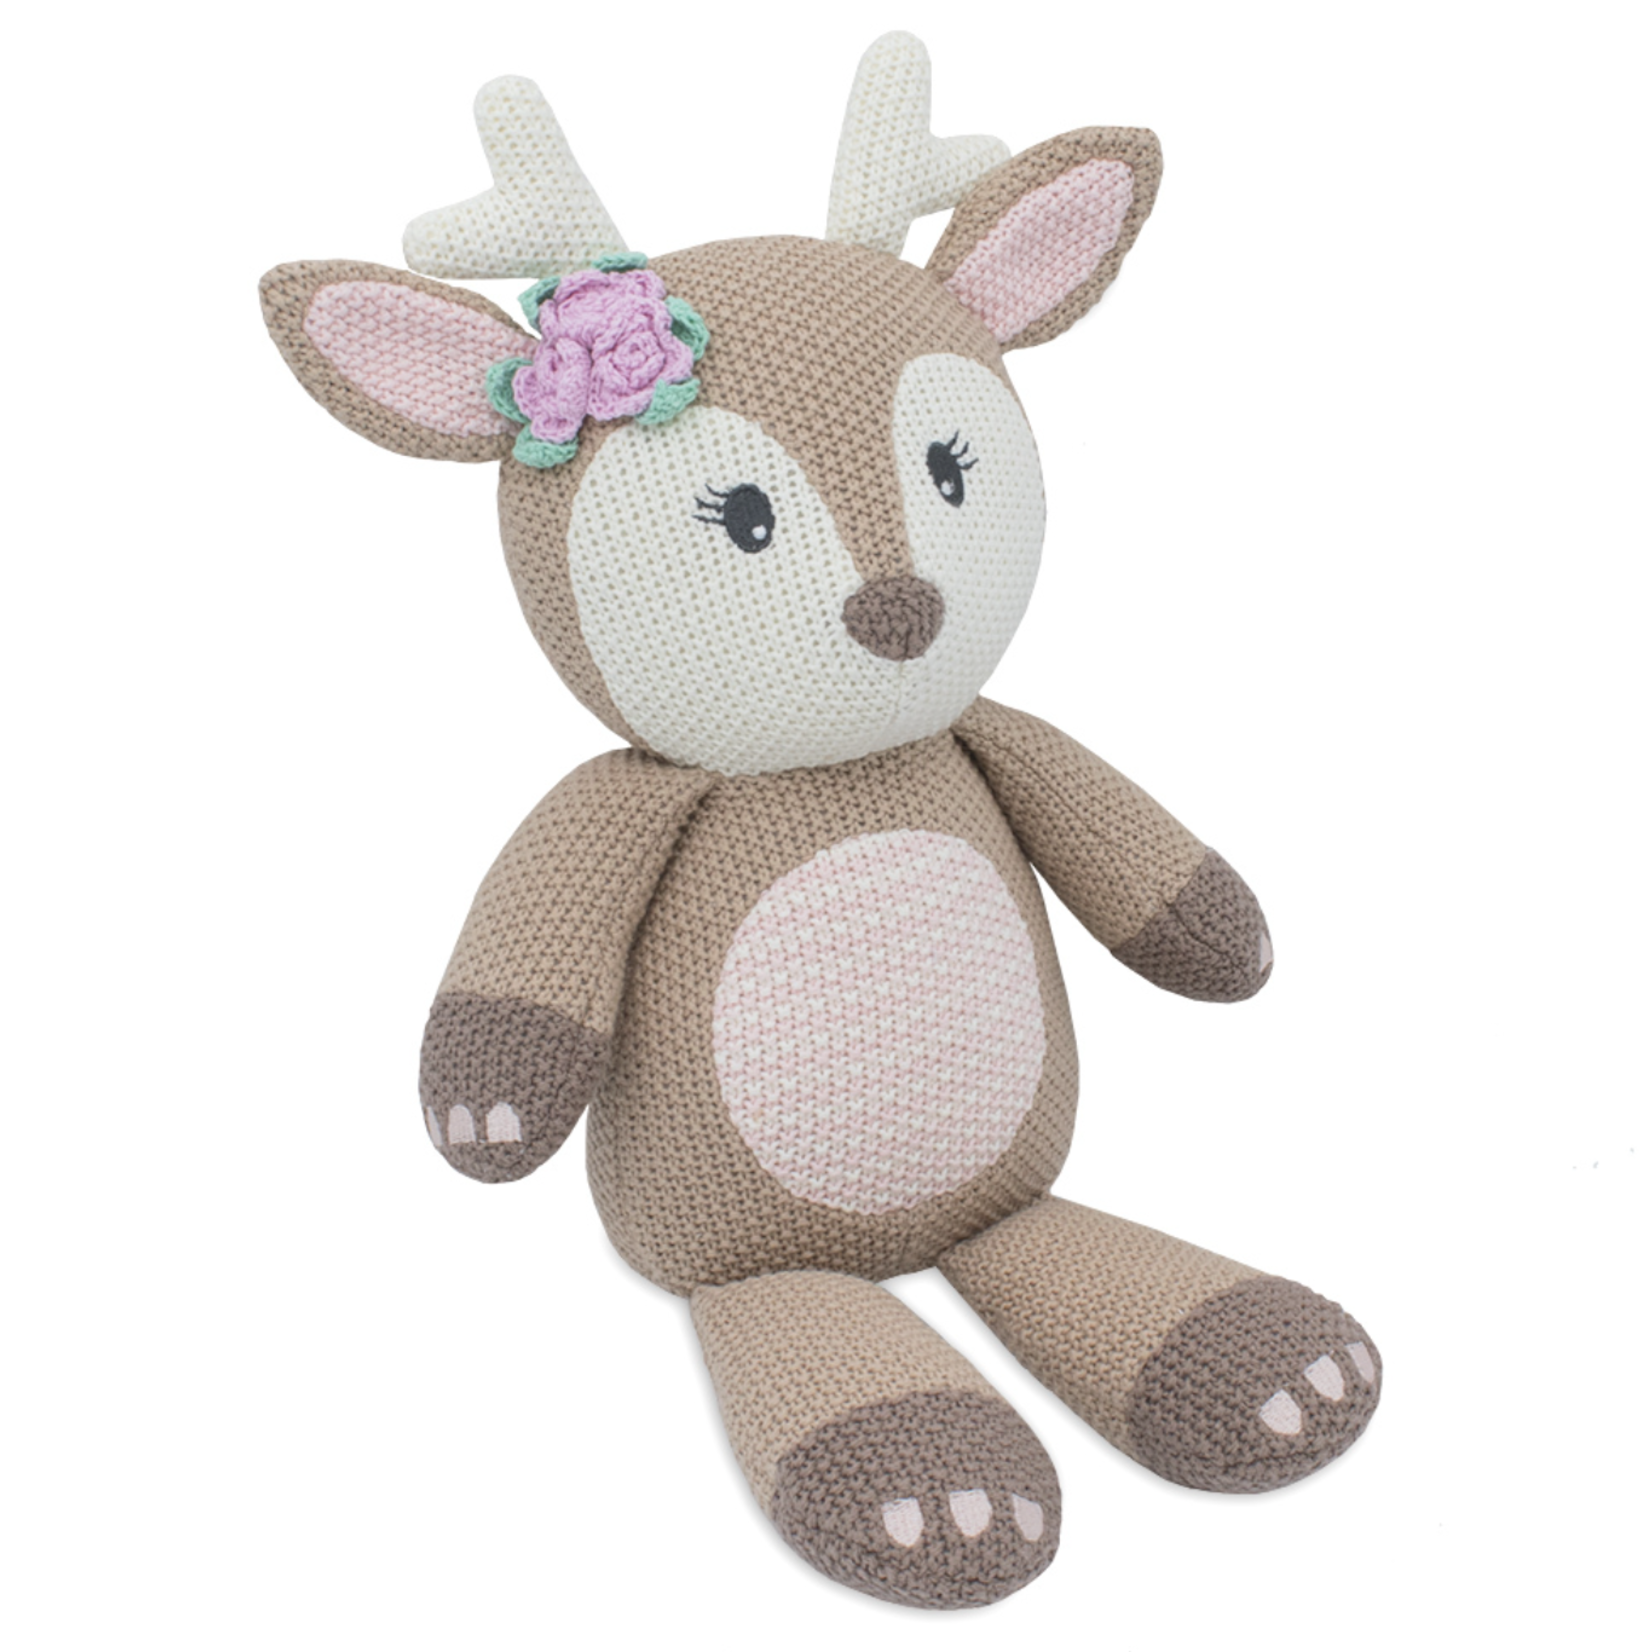 Living Textiles Ava the Fawn Knitted Toy